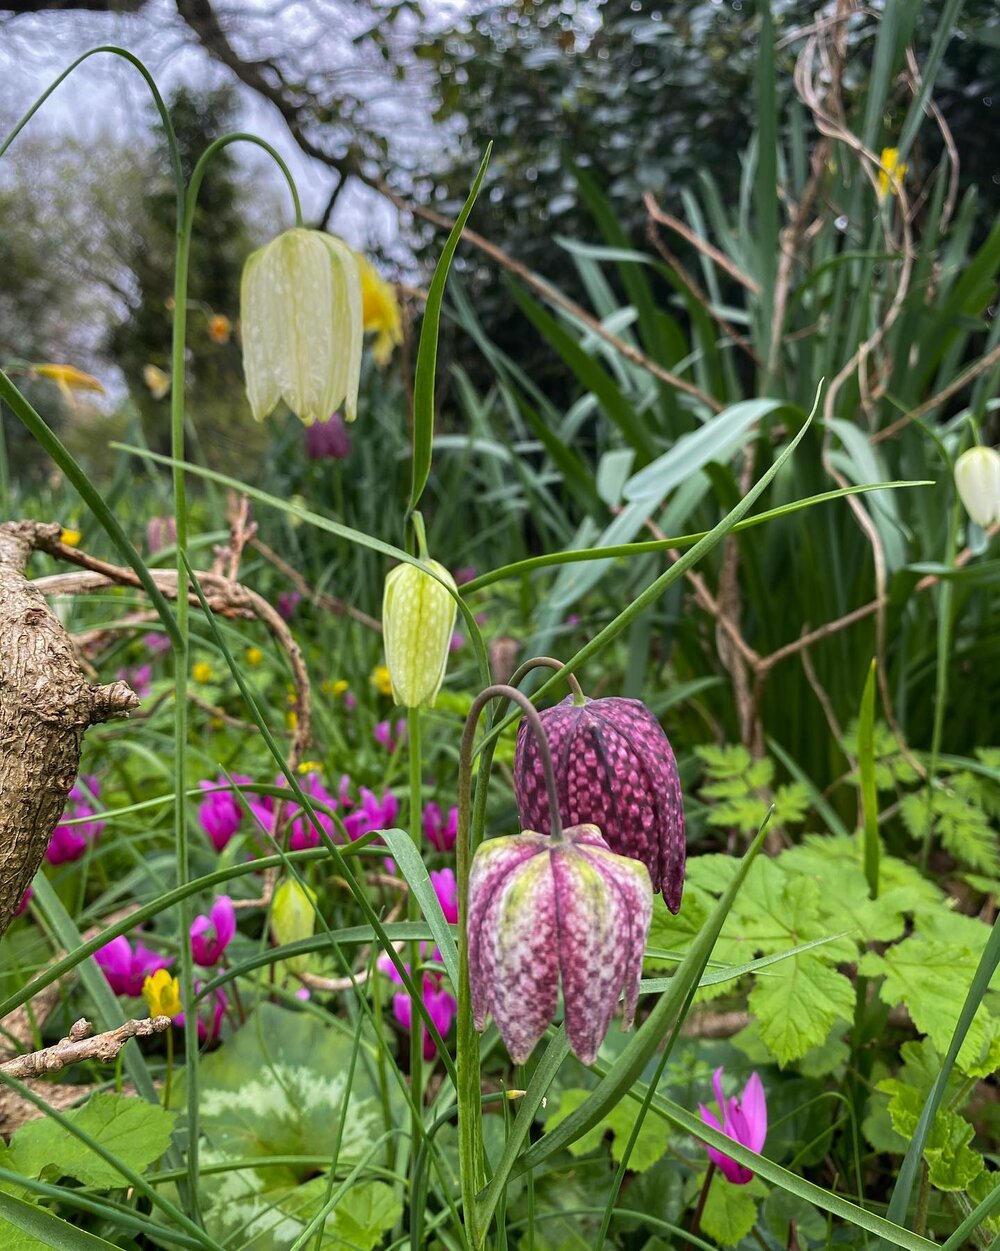 🌸🌼 Spring has arrived, and the wildflowers are in full bloom! I'm excited to share some photos of the beautiful spring sowbread, exotic to the UK, and the native snakeshead fritillaries and bluebells that are currently painting Bristol with a pop o